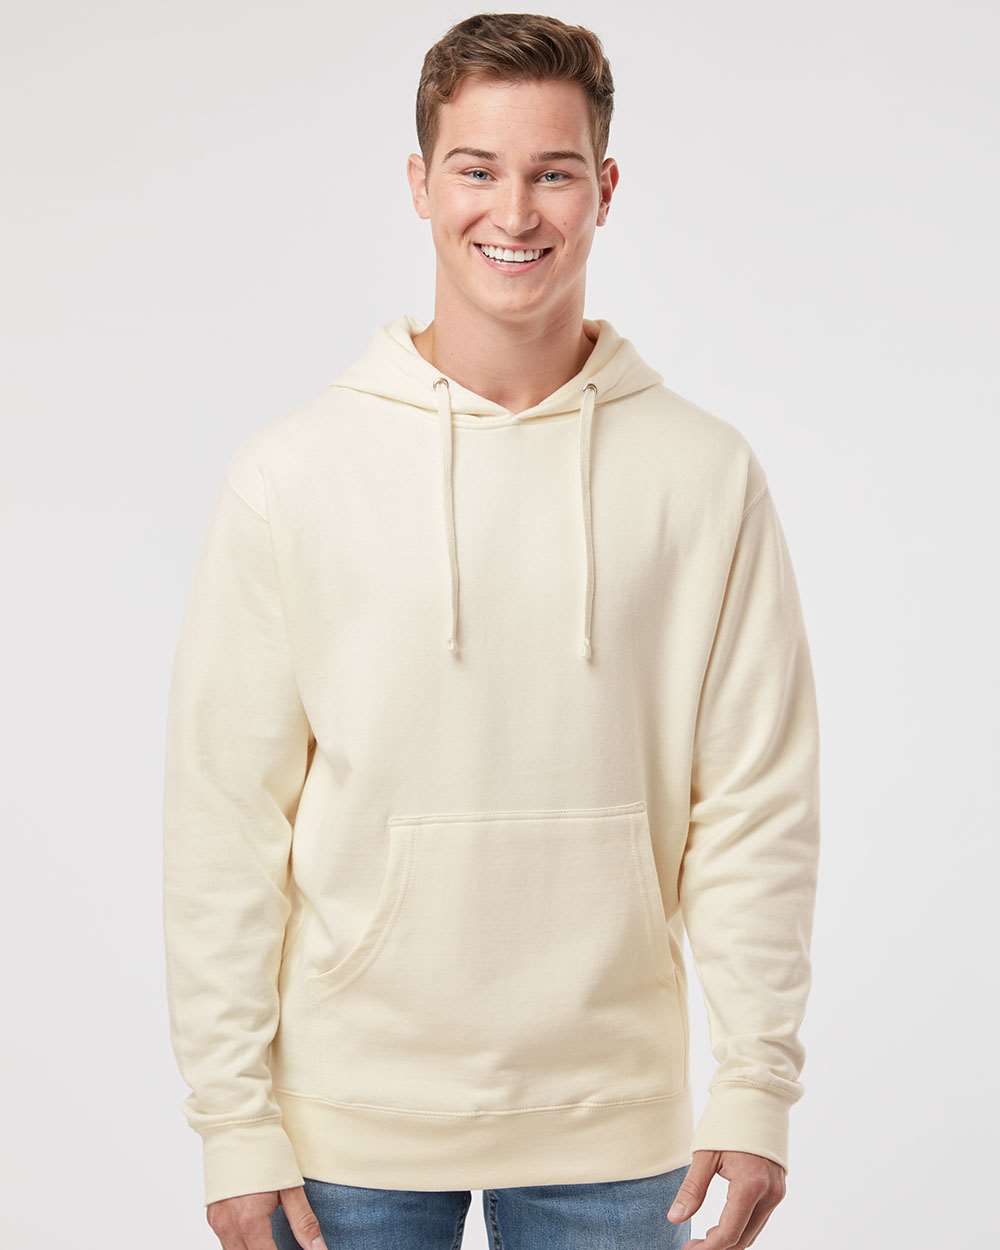 Independent Trading Co. Midweight Hooded Sweatshirt SS4500 #colormdl_Bone